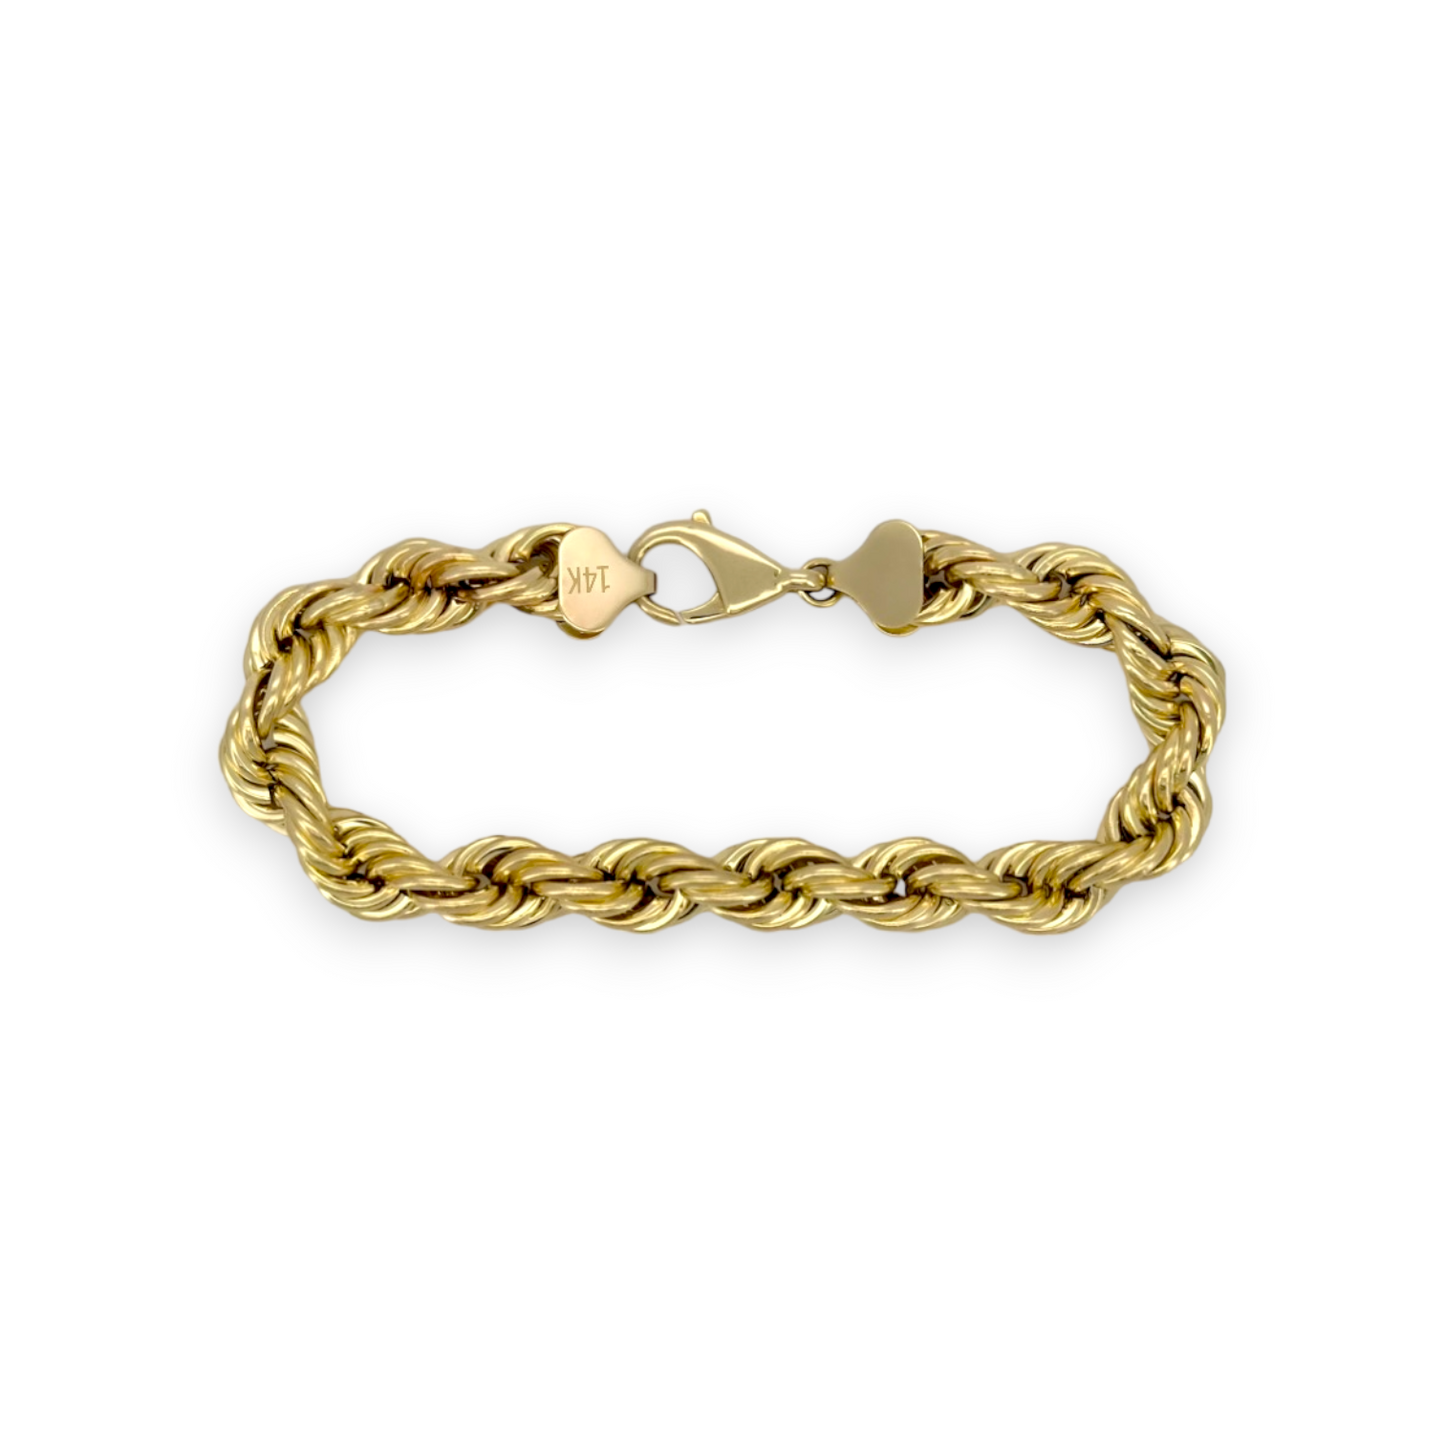 Rope Chain Bracelet - 14K Yellow Gold - Solid